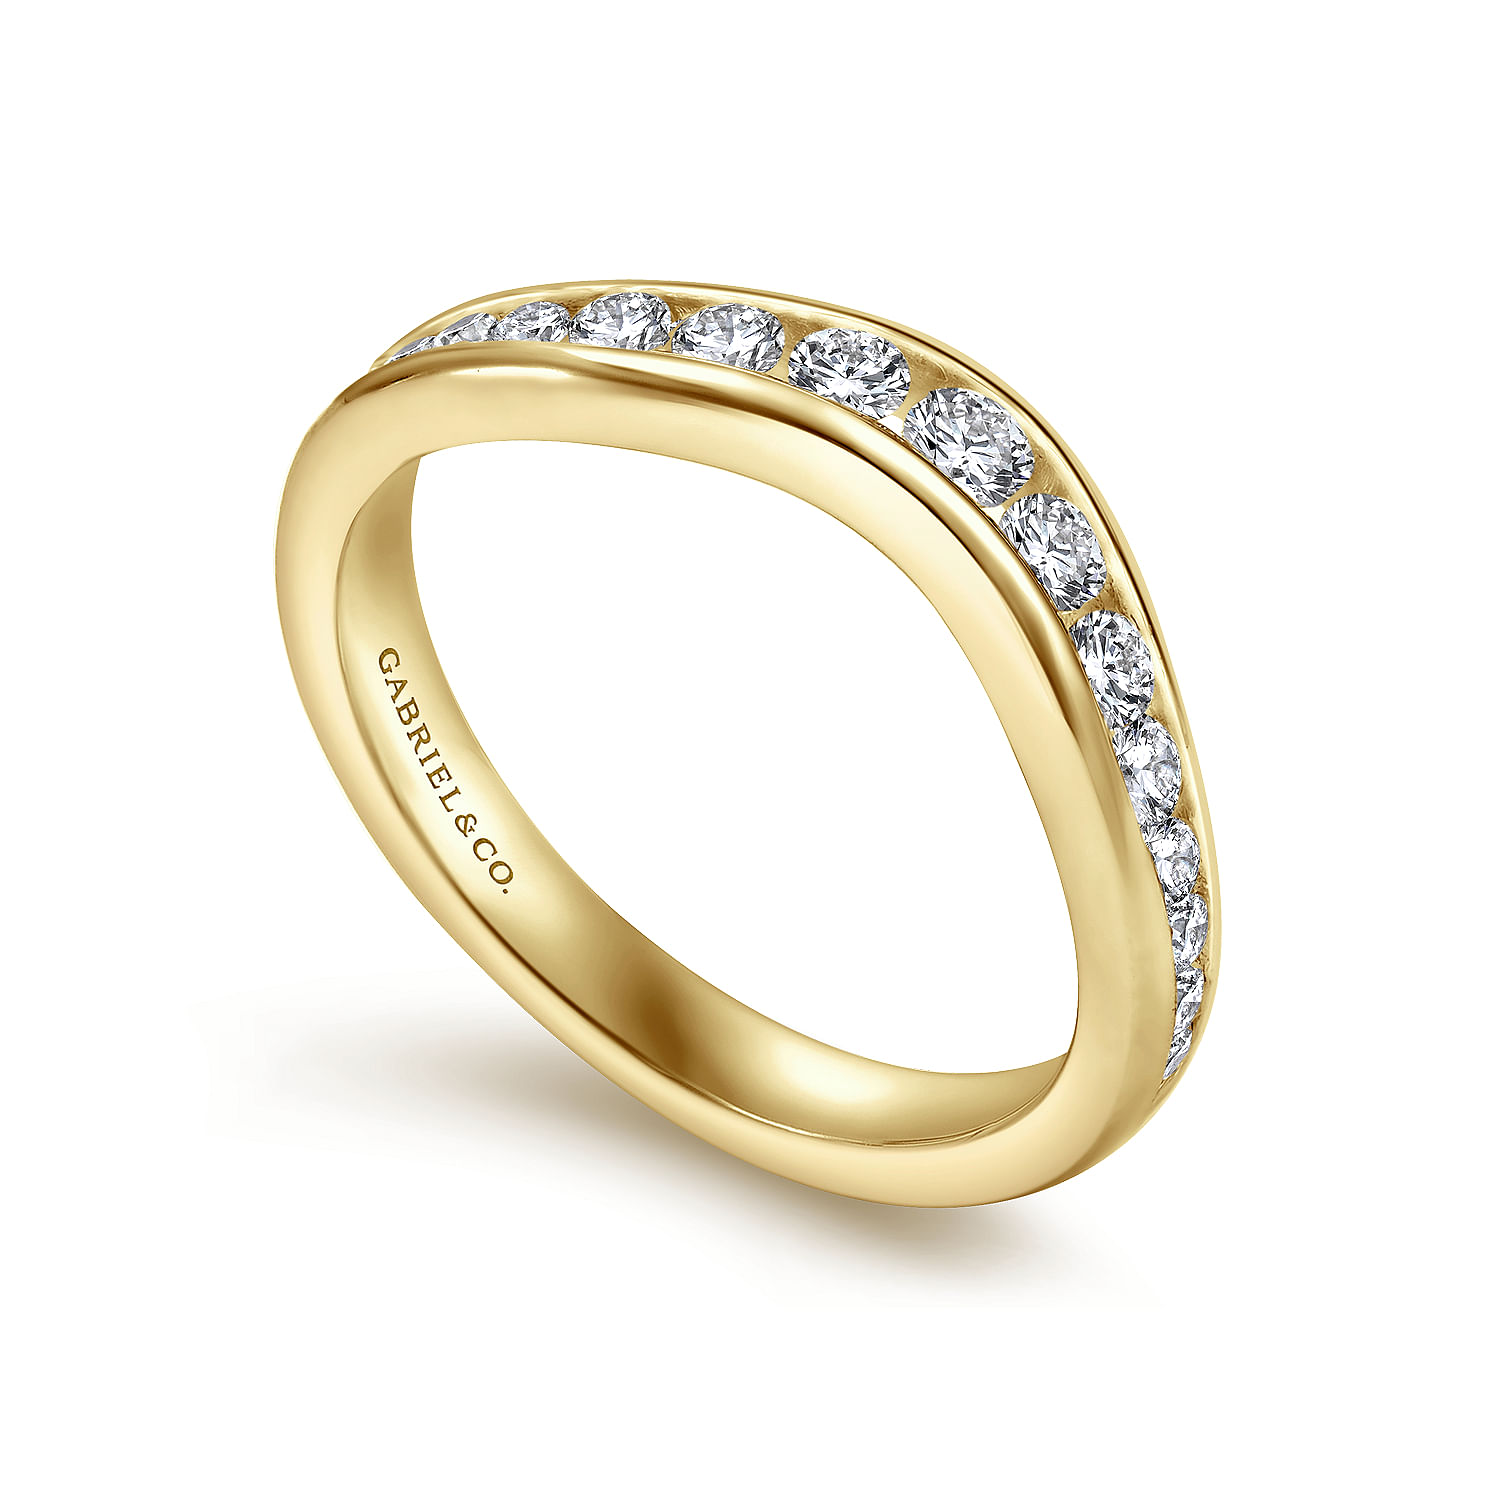 Curved 14K Yellow Gold Channel Set Diamond Wedding Band